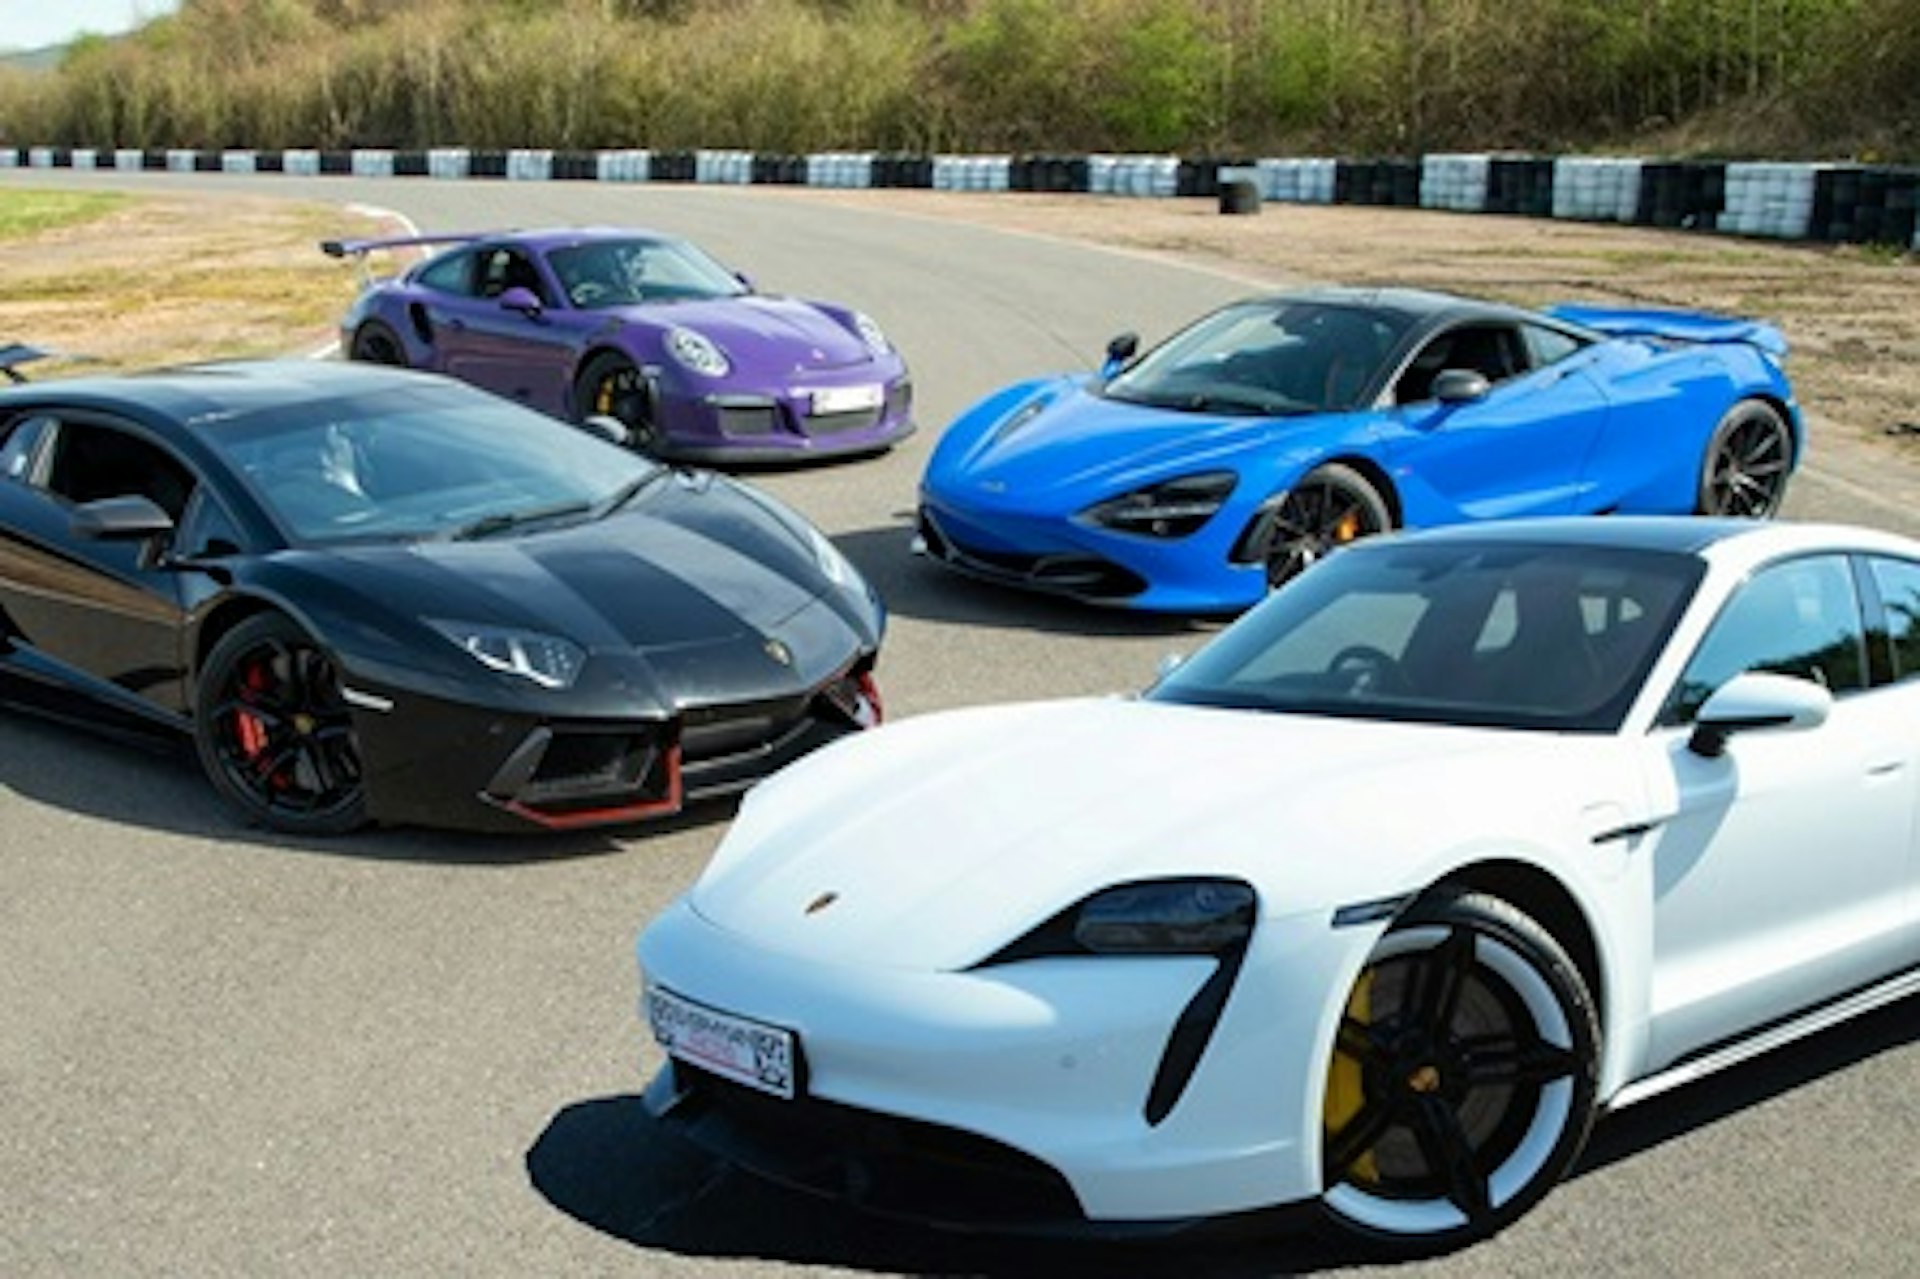 VIP Four Premium Supercar Drive with Hangar Tour, Lunch and High Speed Passenger Ride 2